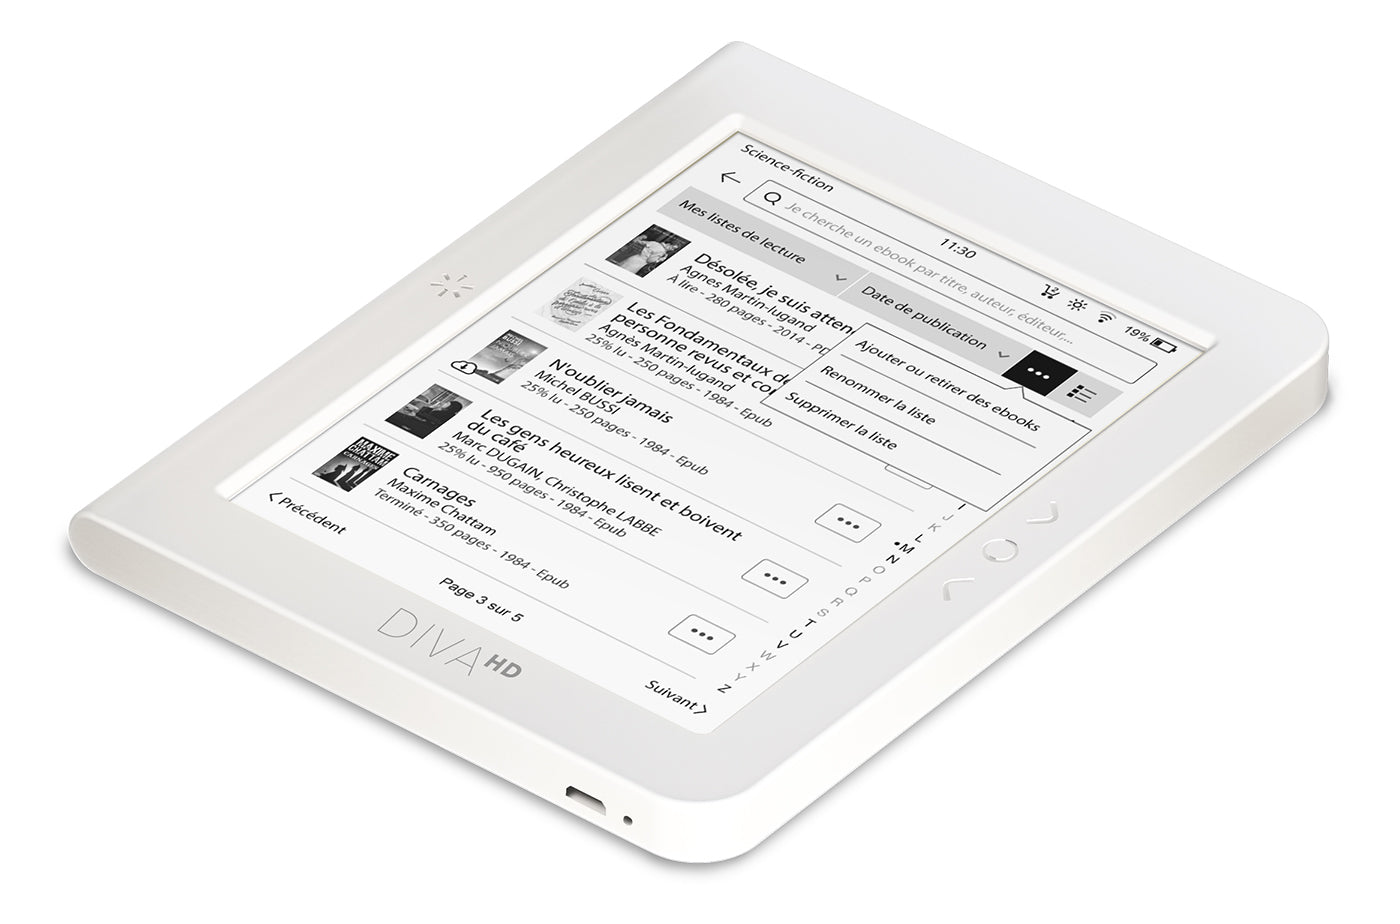 Two new French e-readers: Vivlio Light and Vivlio Light HD